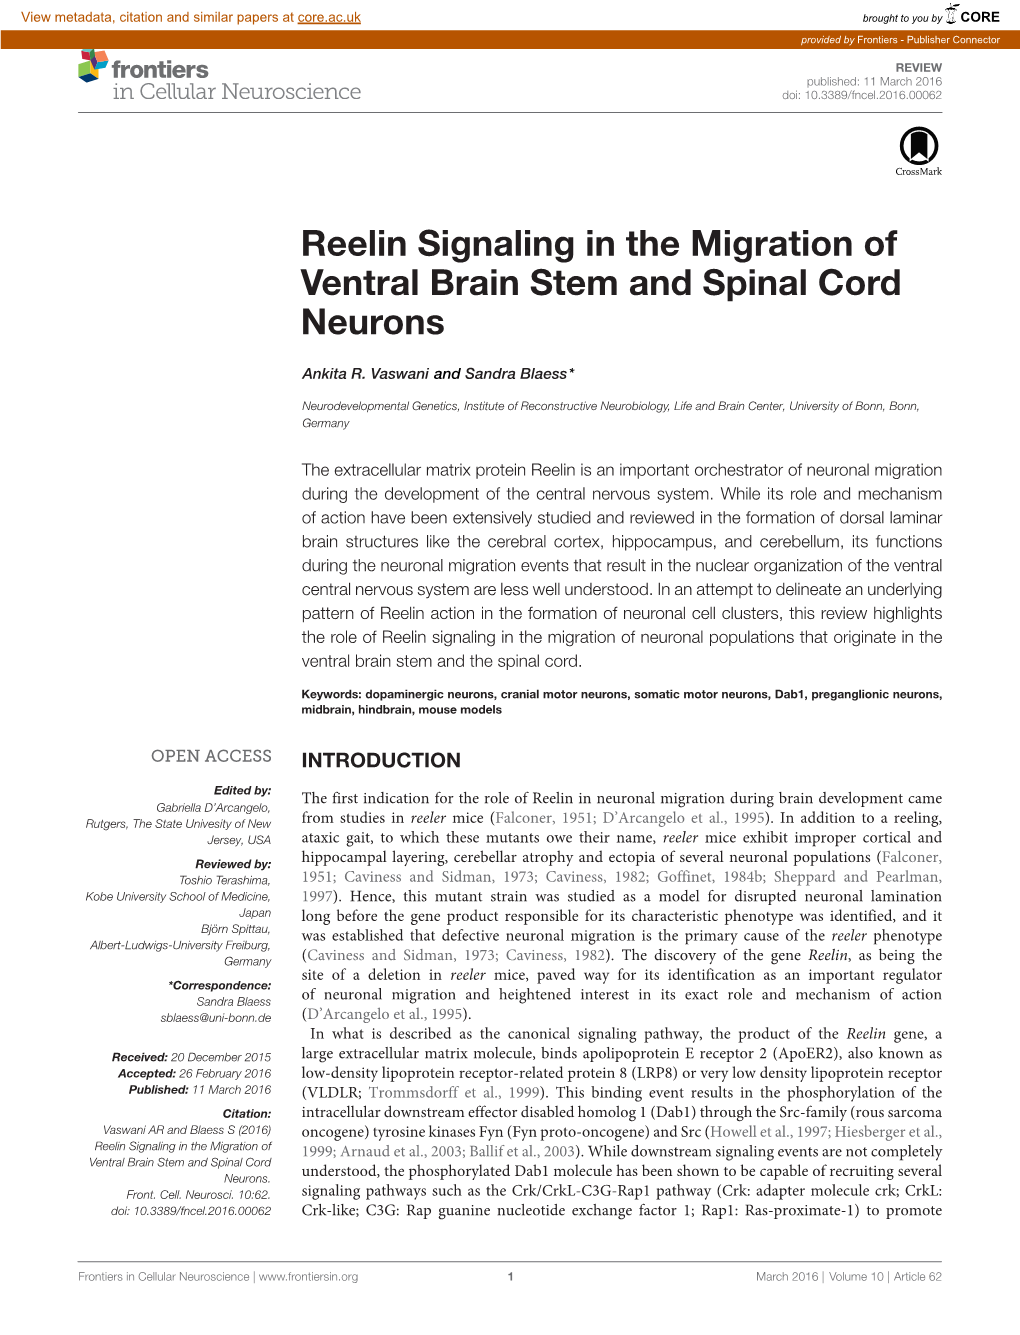 Reelin Signaling in the Migration of Ventral Brain Stem and Spinal Cord Neurons